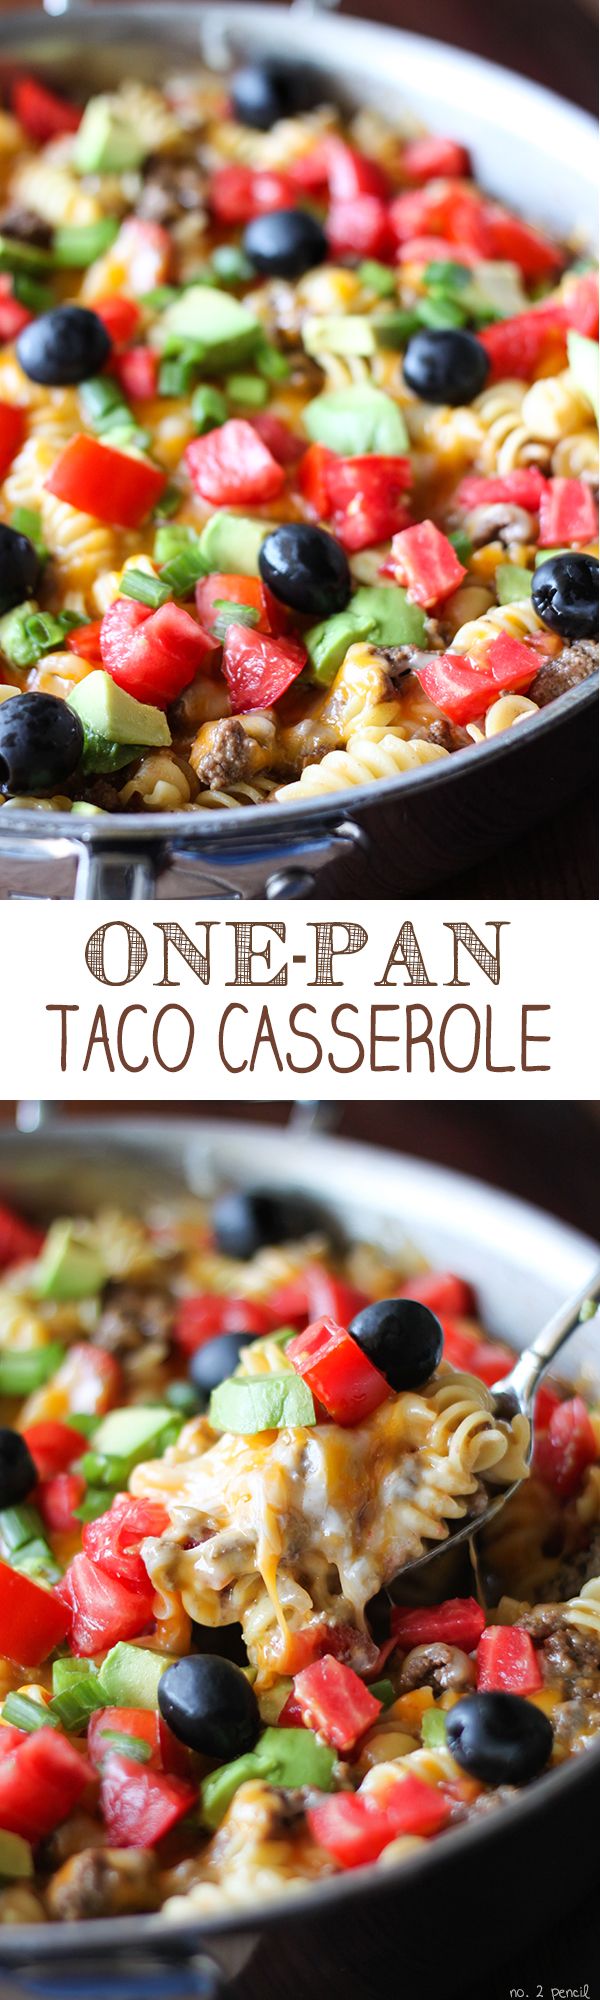 One-Pan Taco Casserole - ground beef, pasta, tomatoes and melty cheese!